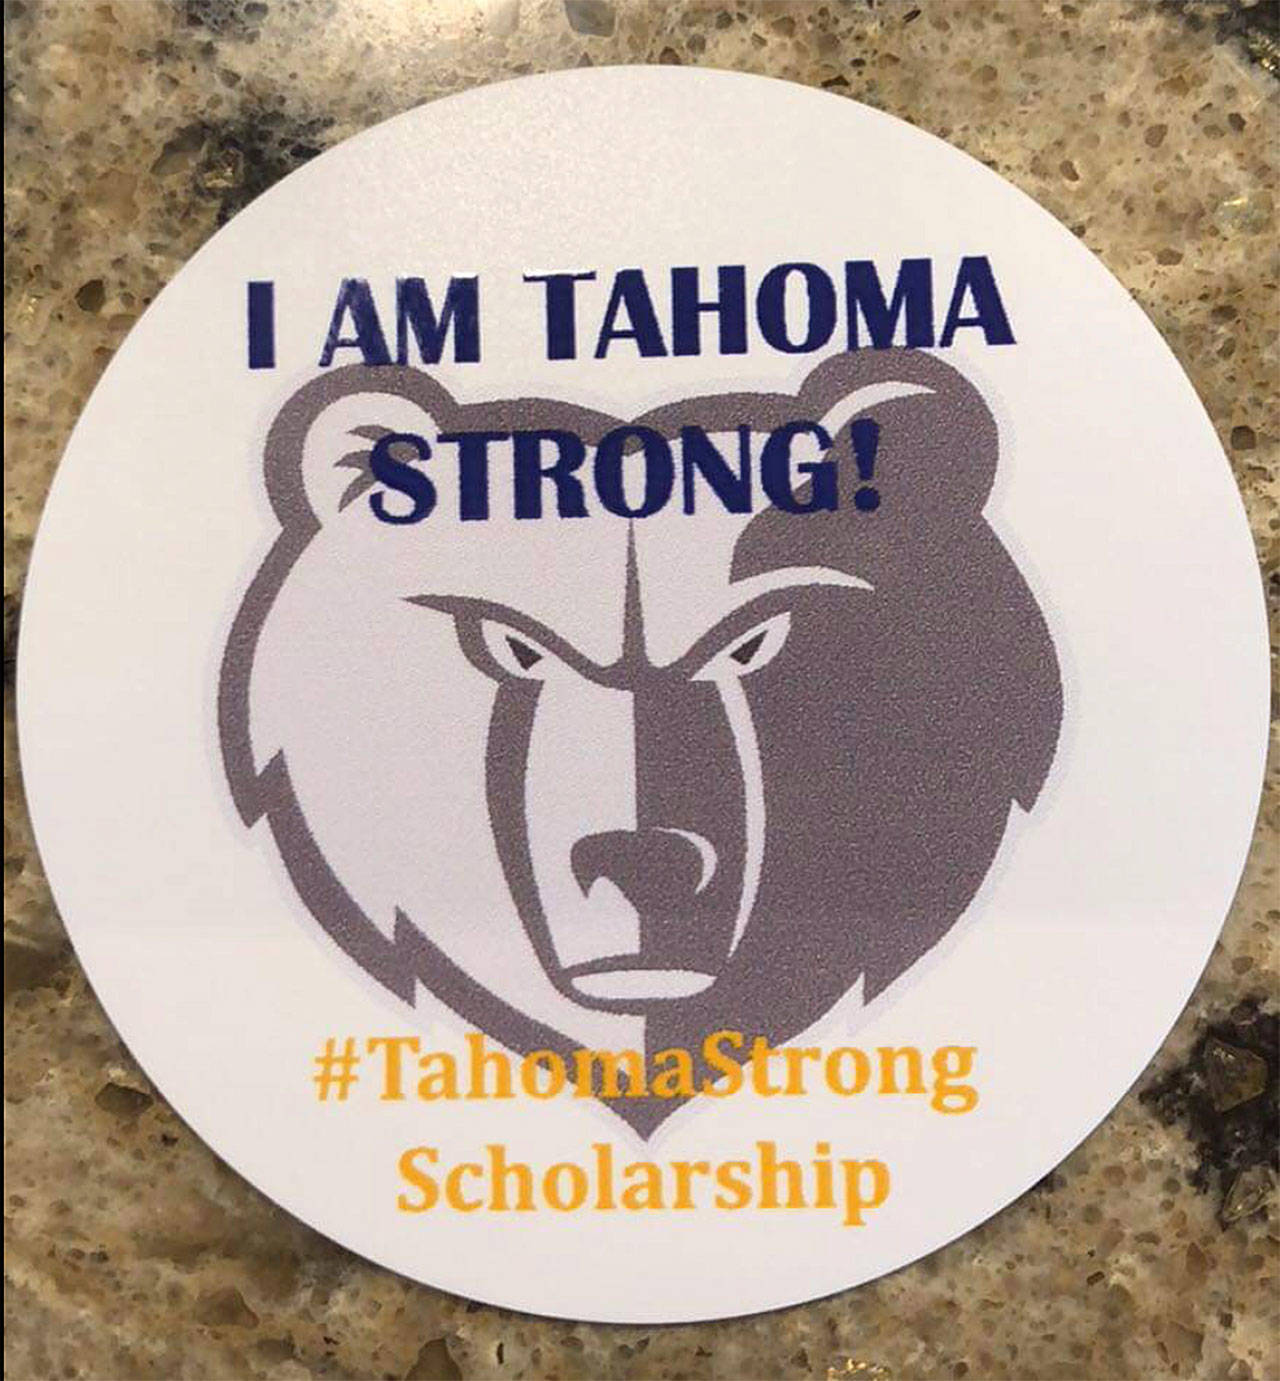 Submitted photo from Amy DeVore                                Photo of the sticker that will be passed around to students to spread the word about the Tahoma Strong Scholarship.